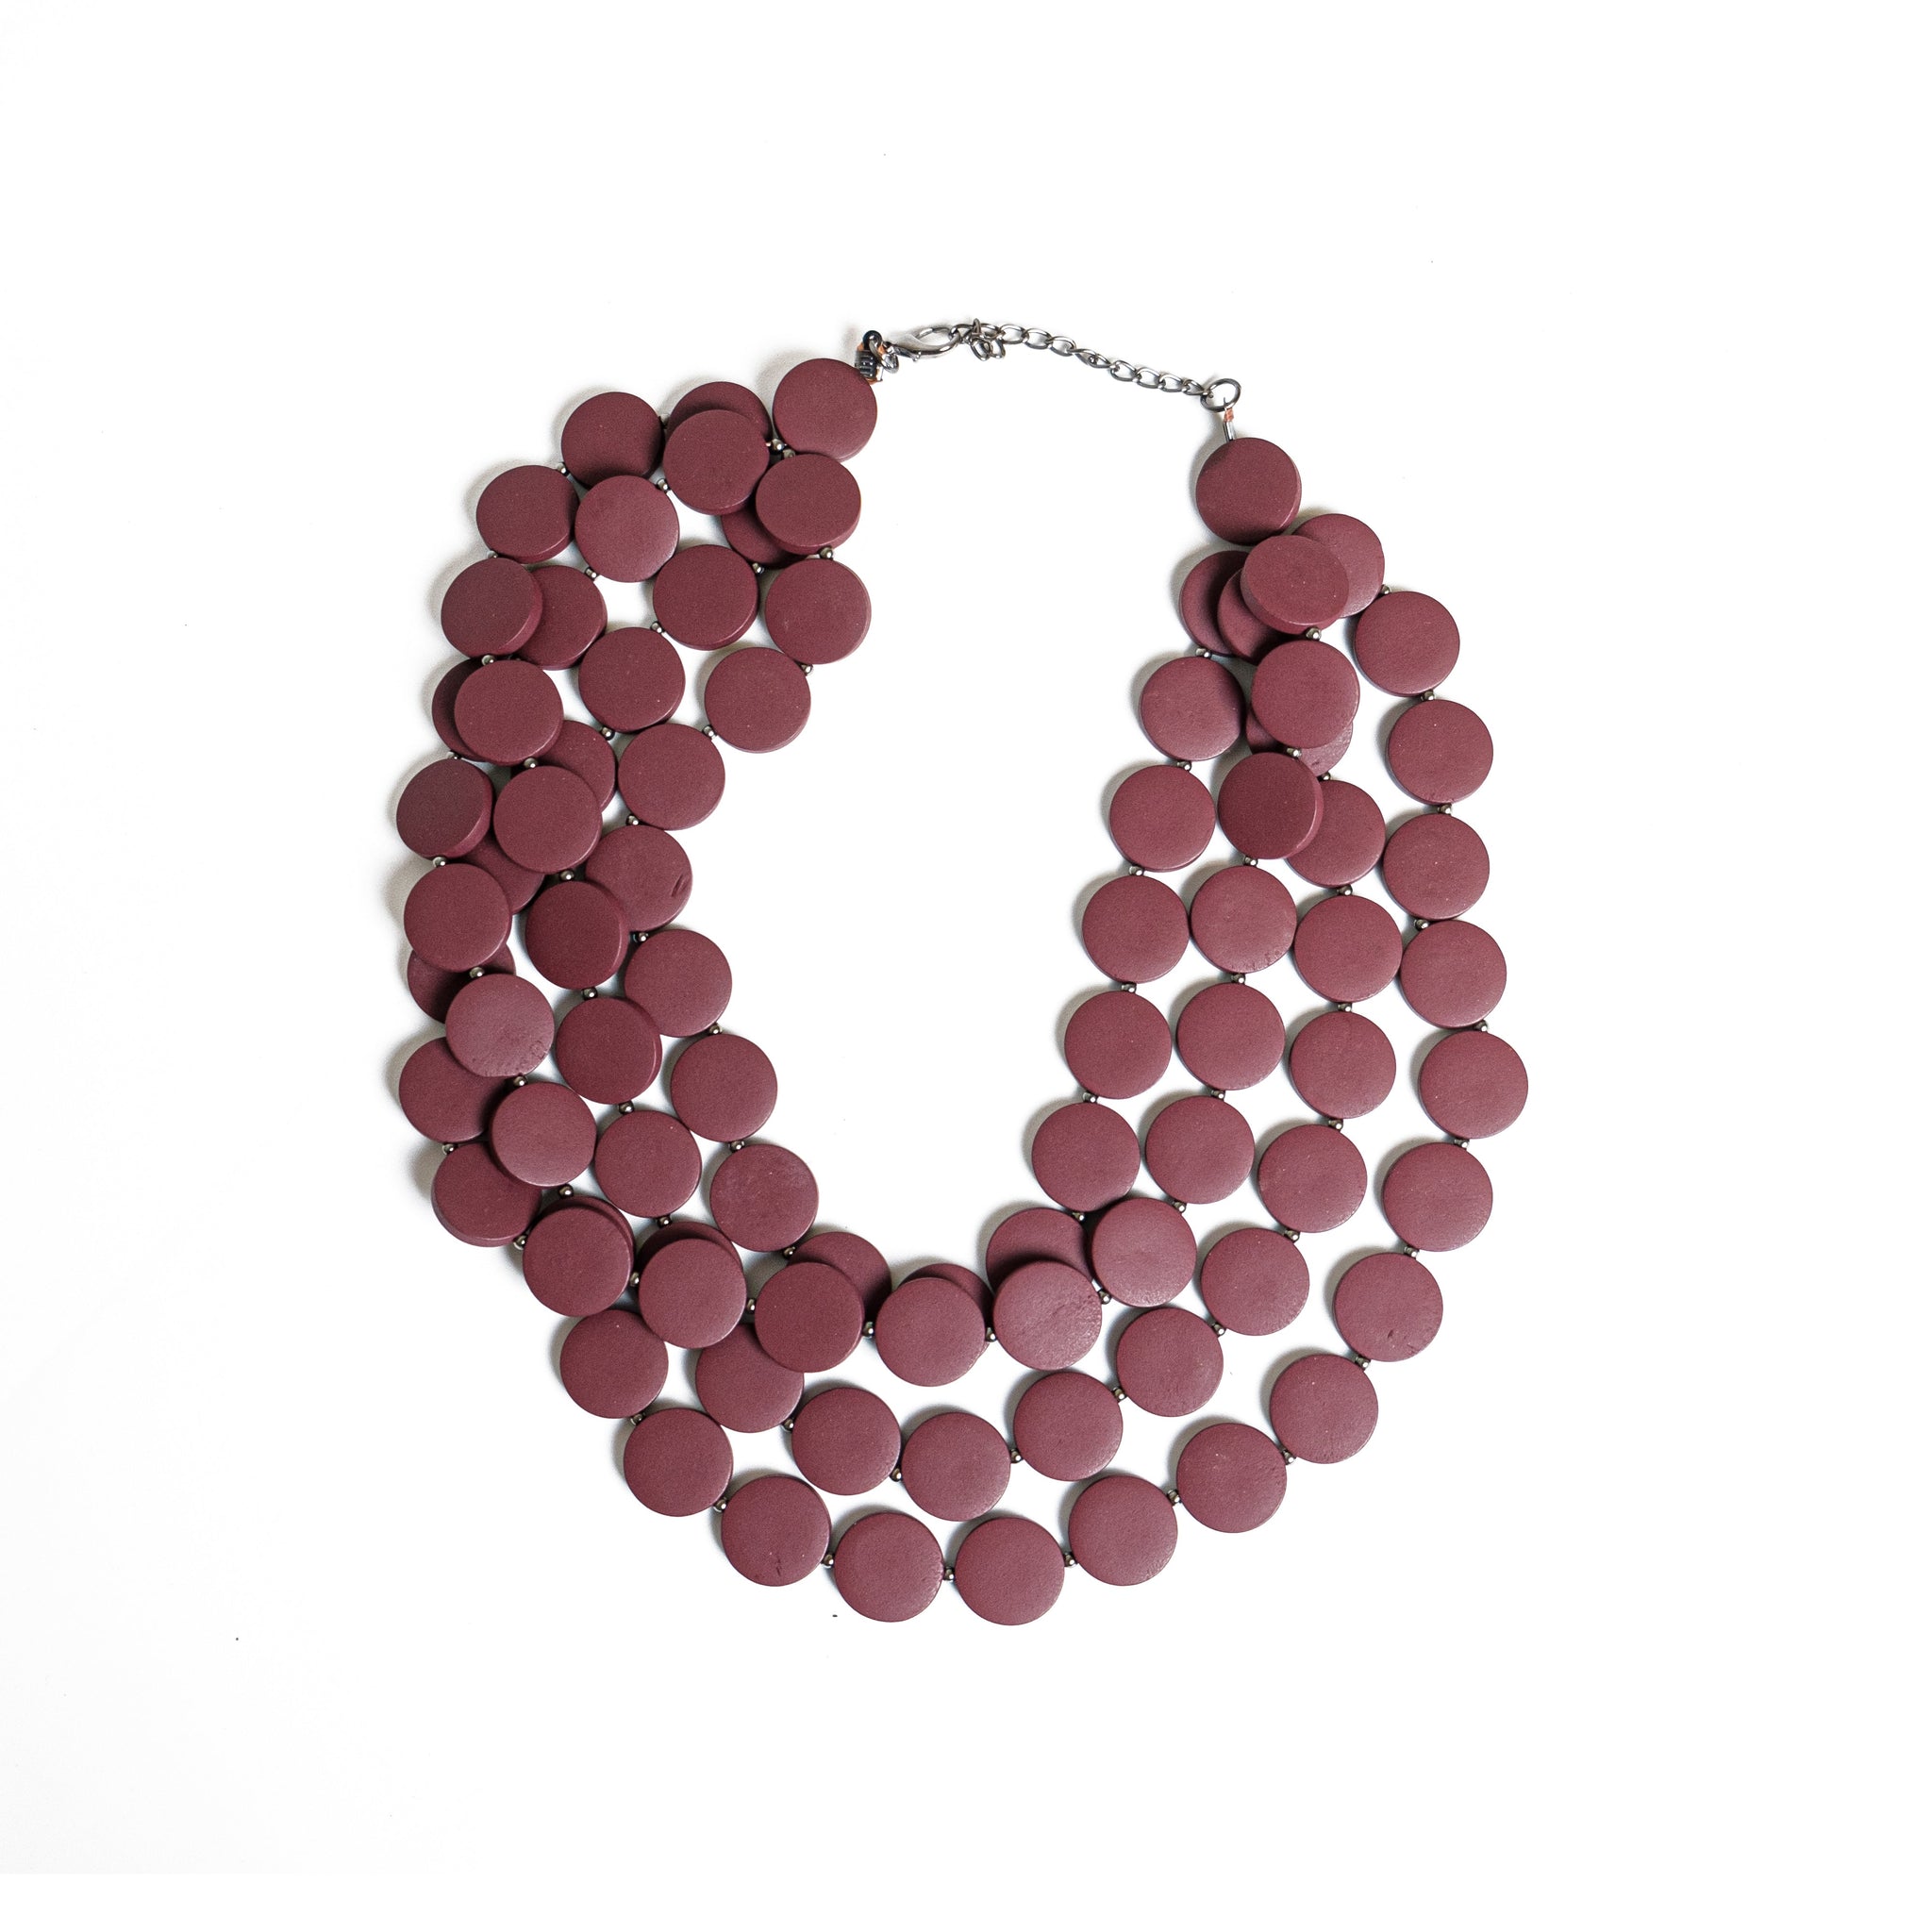 Chokore Bohemian Necklace with Wooden Beads (Deep Red)